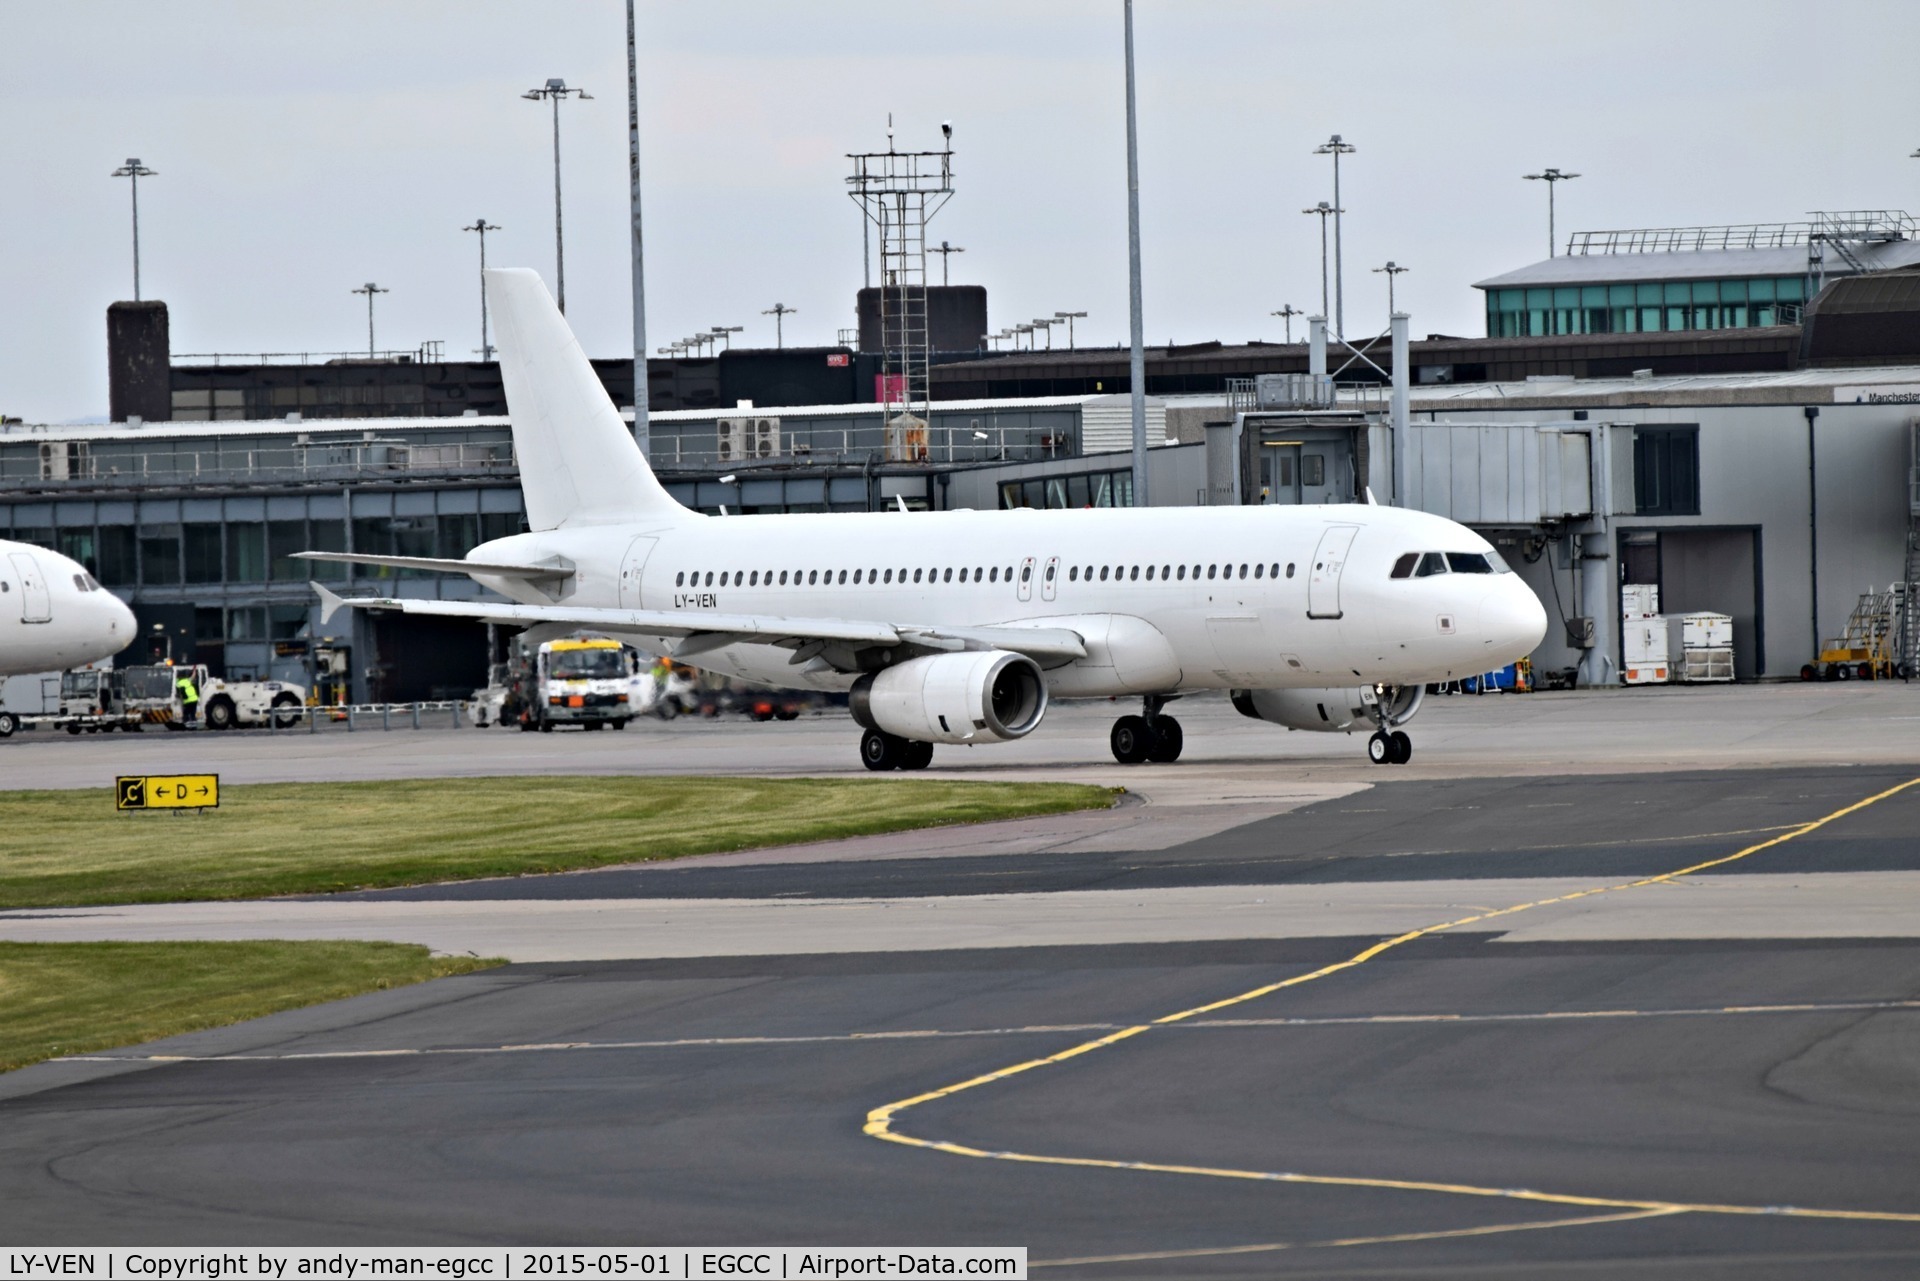 LY-VEN, 2001 Airbus A320-233 C/N 1626, taxing out to the runway for take off

poss opp for [TCX]